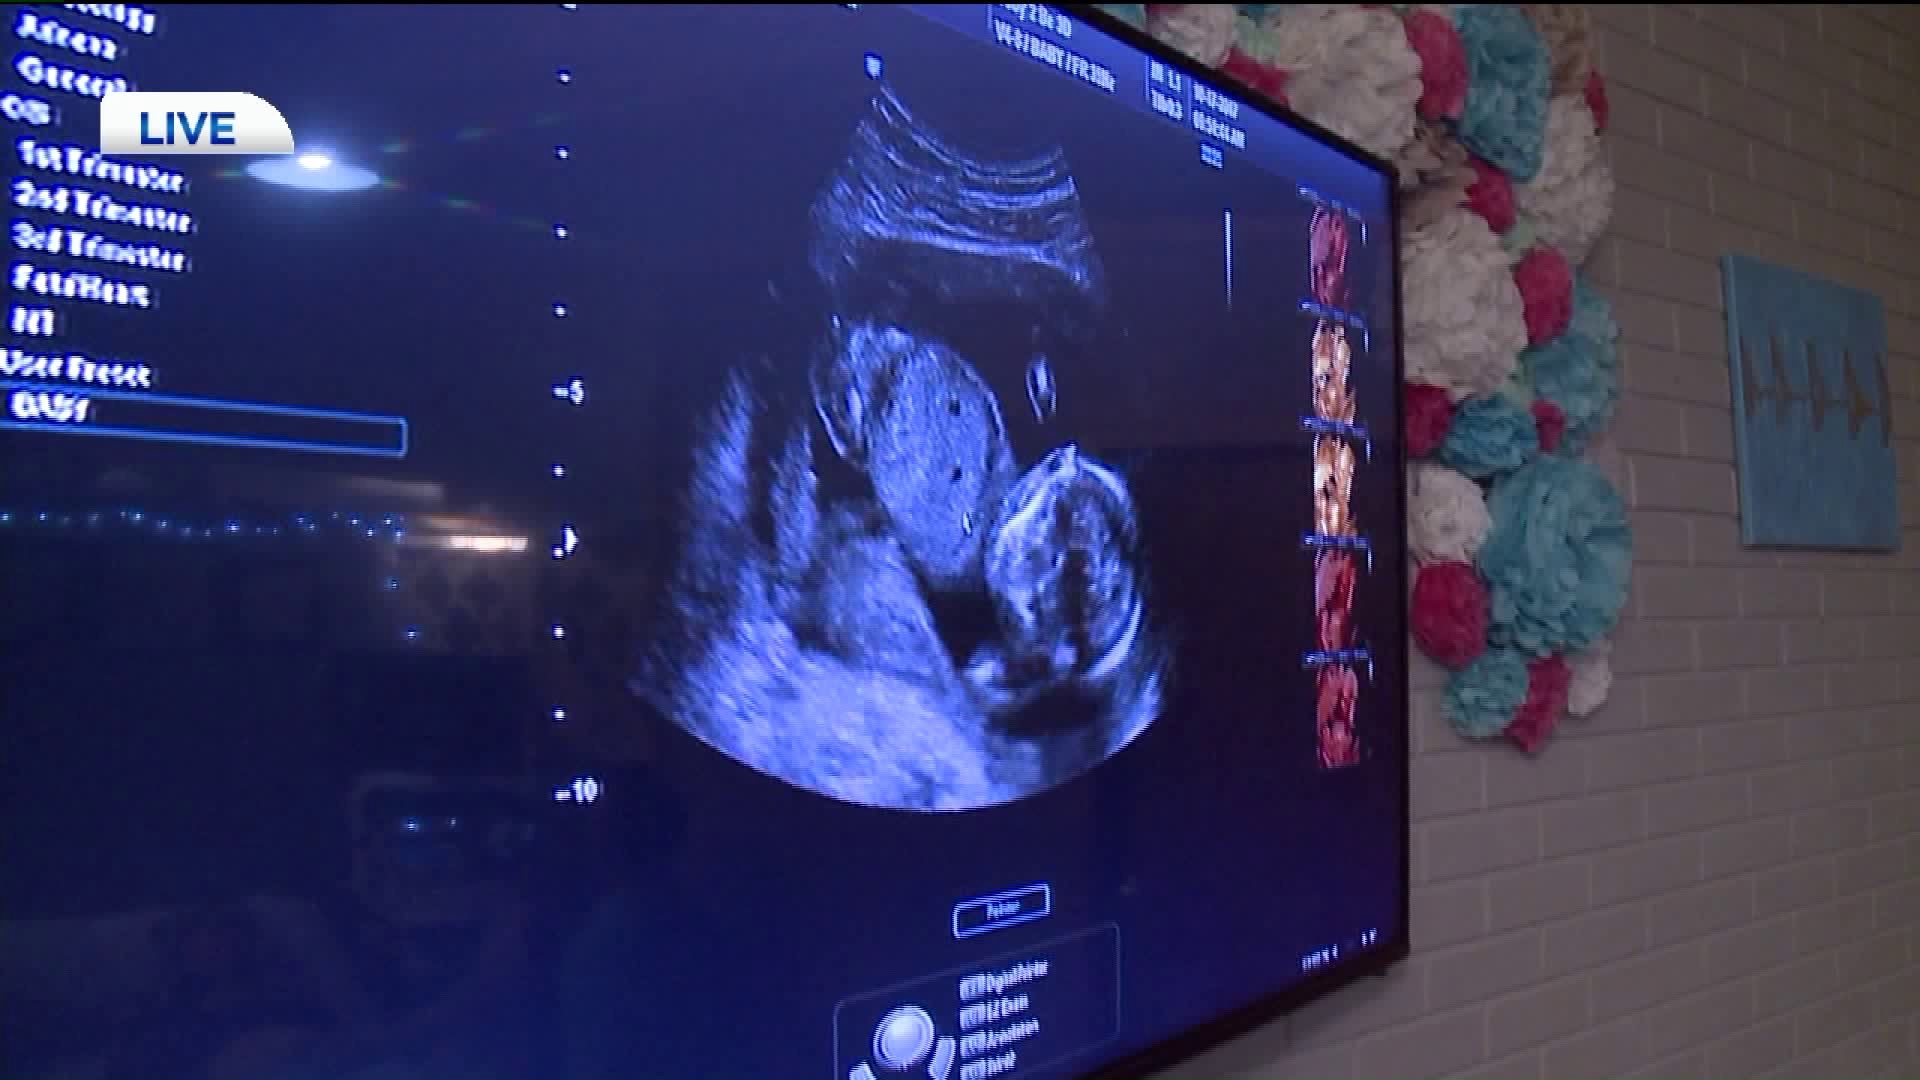 Baby's Big Debut: High Tech Gender Reveal Facility Opens in Luzerne County